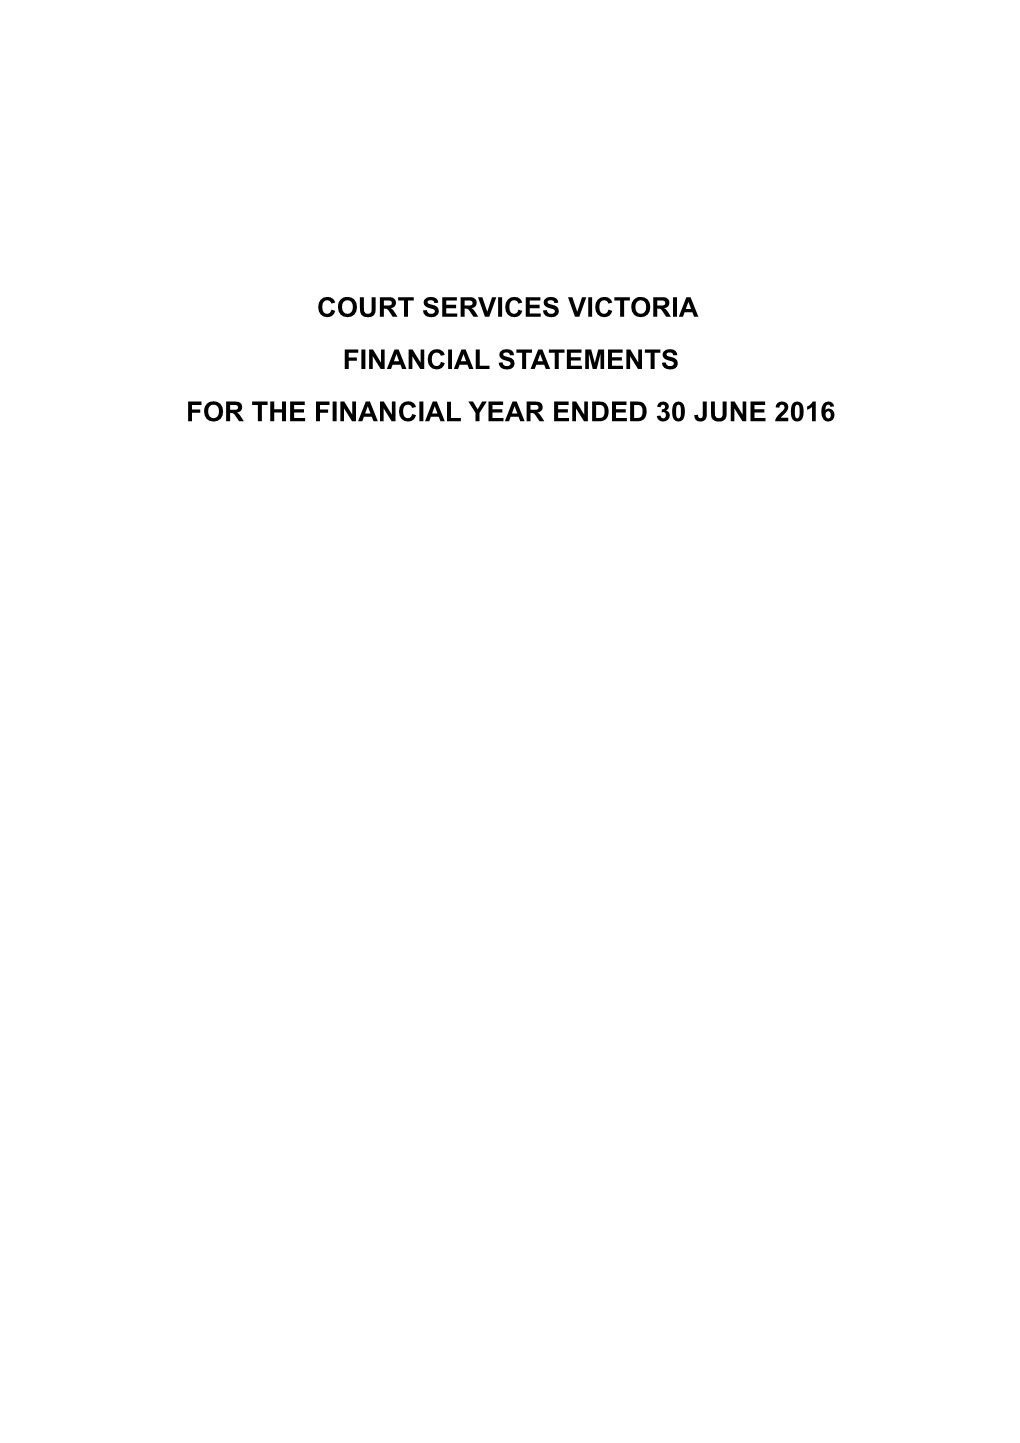 Court Services Victoria Annual Report 2015-16 - Financial Statements